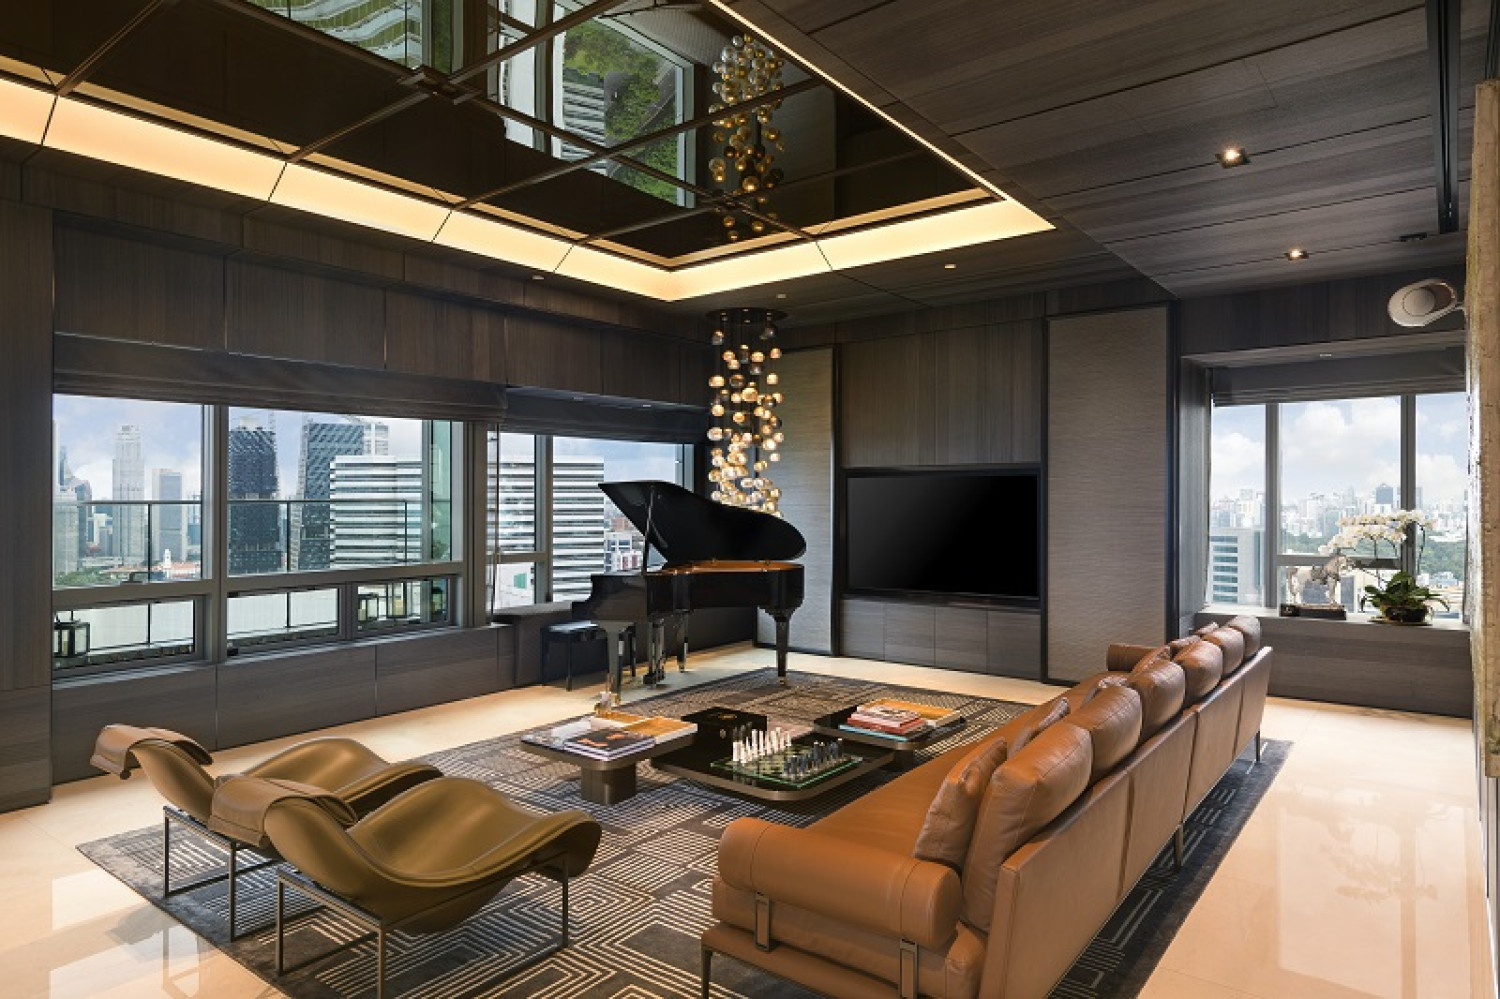 Super penthouse at Concourse Skyline for sale at $48 mil - Property News